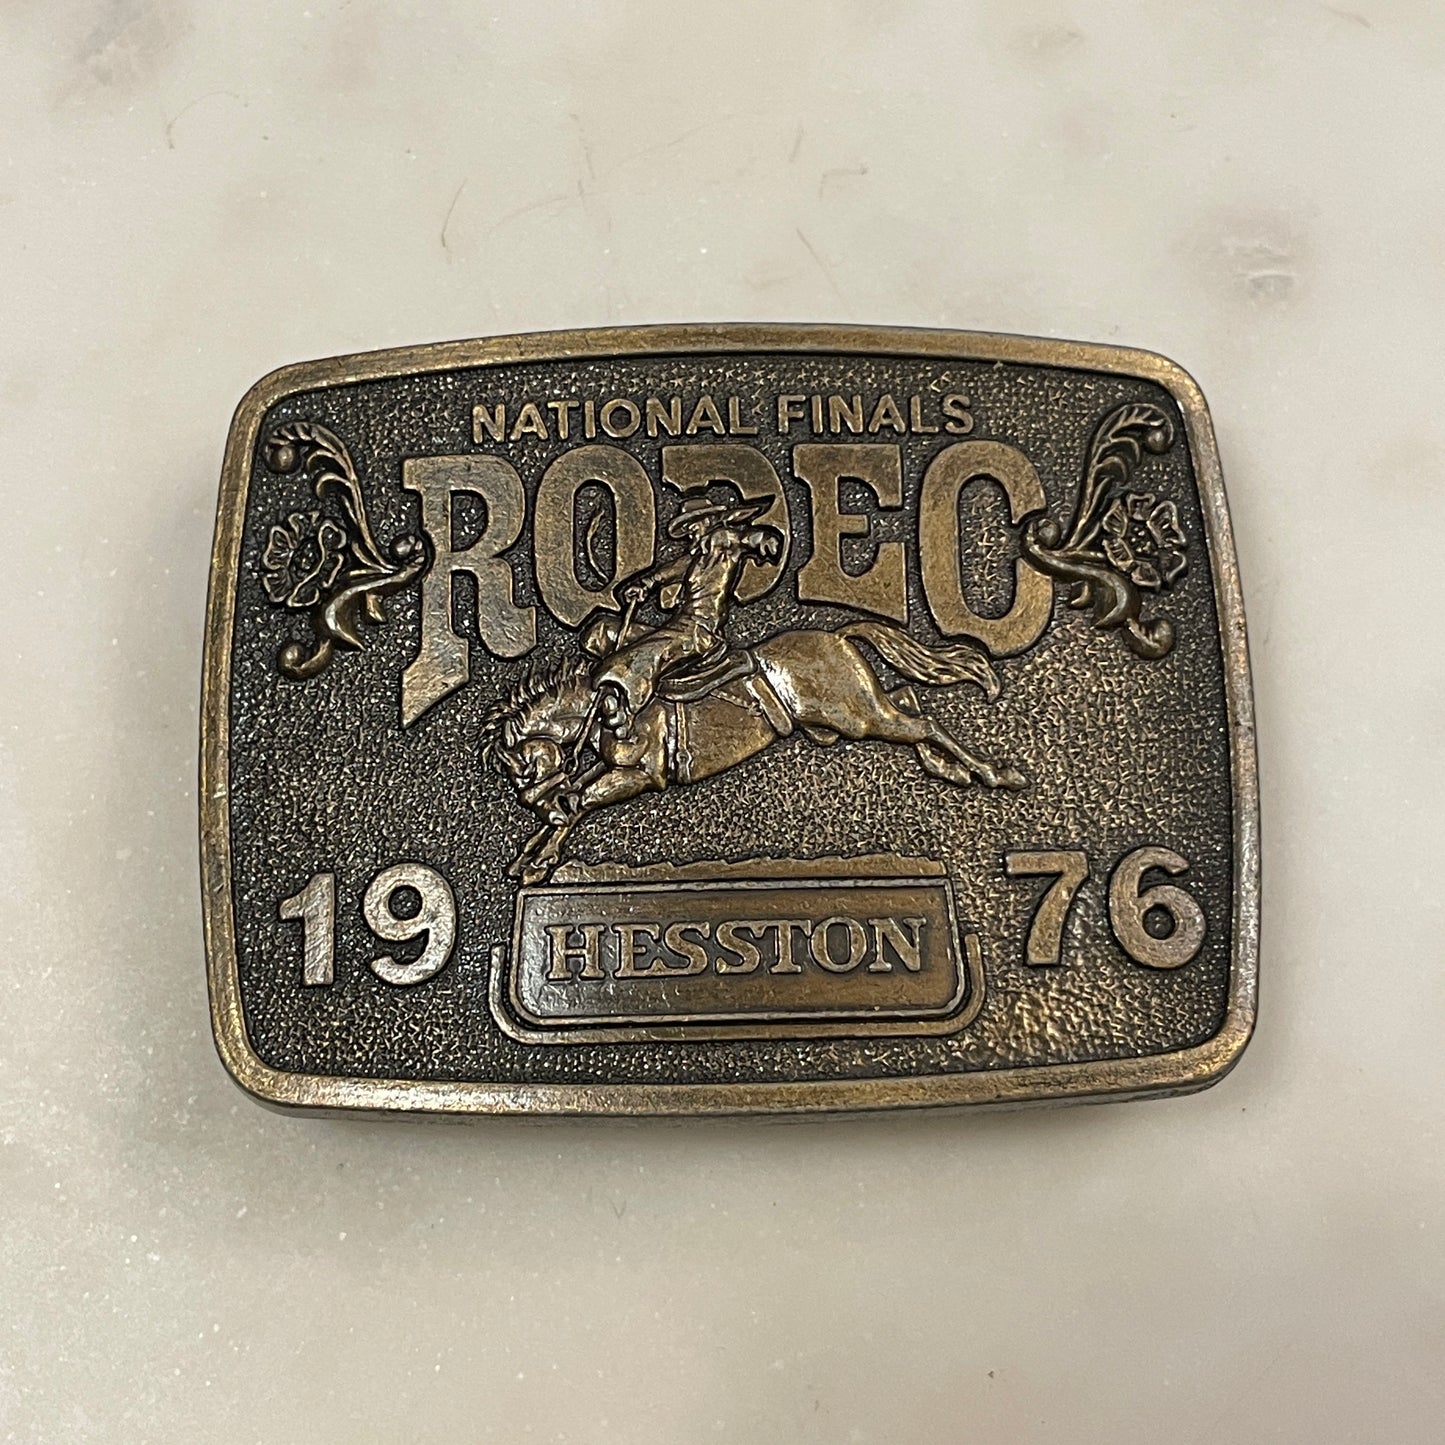 National Finals Rodeo Buckle [1976]